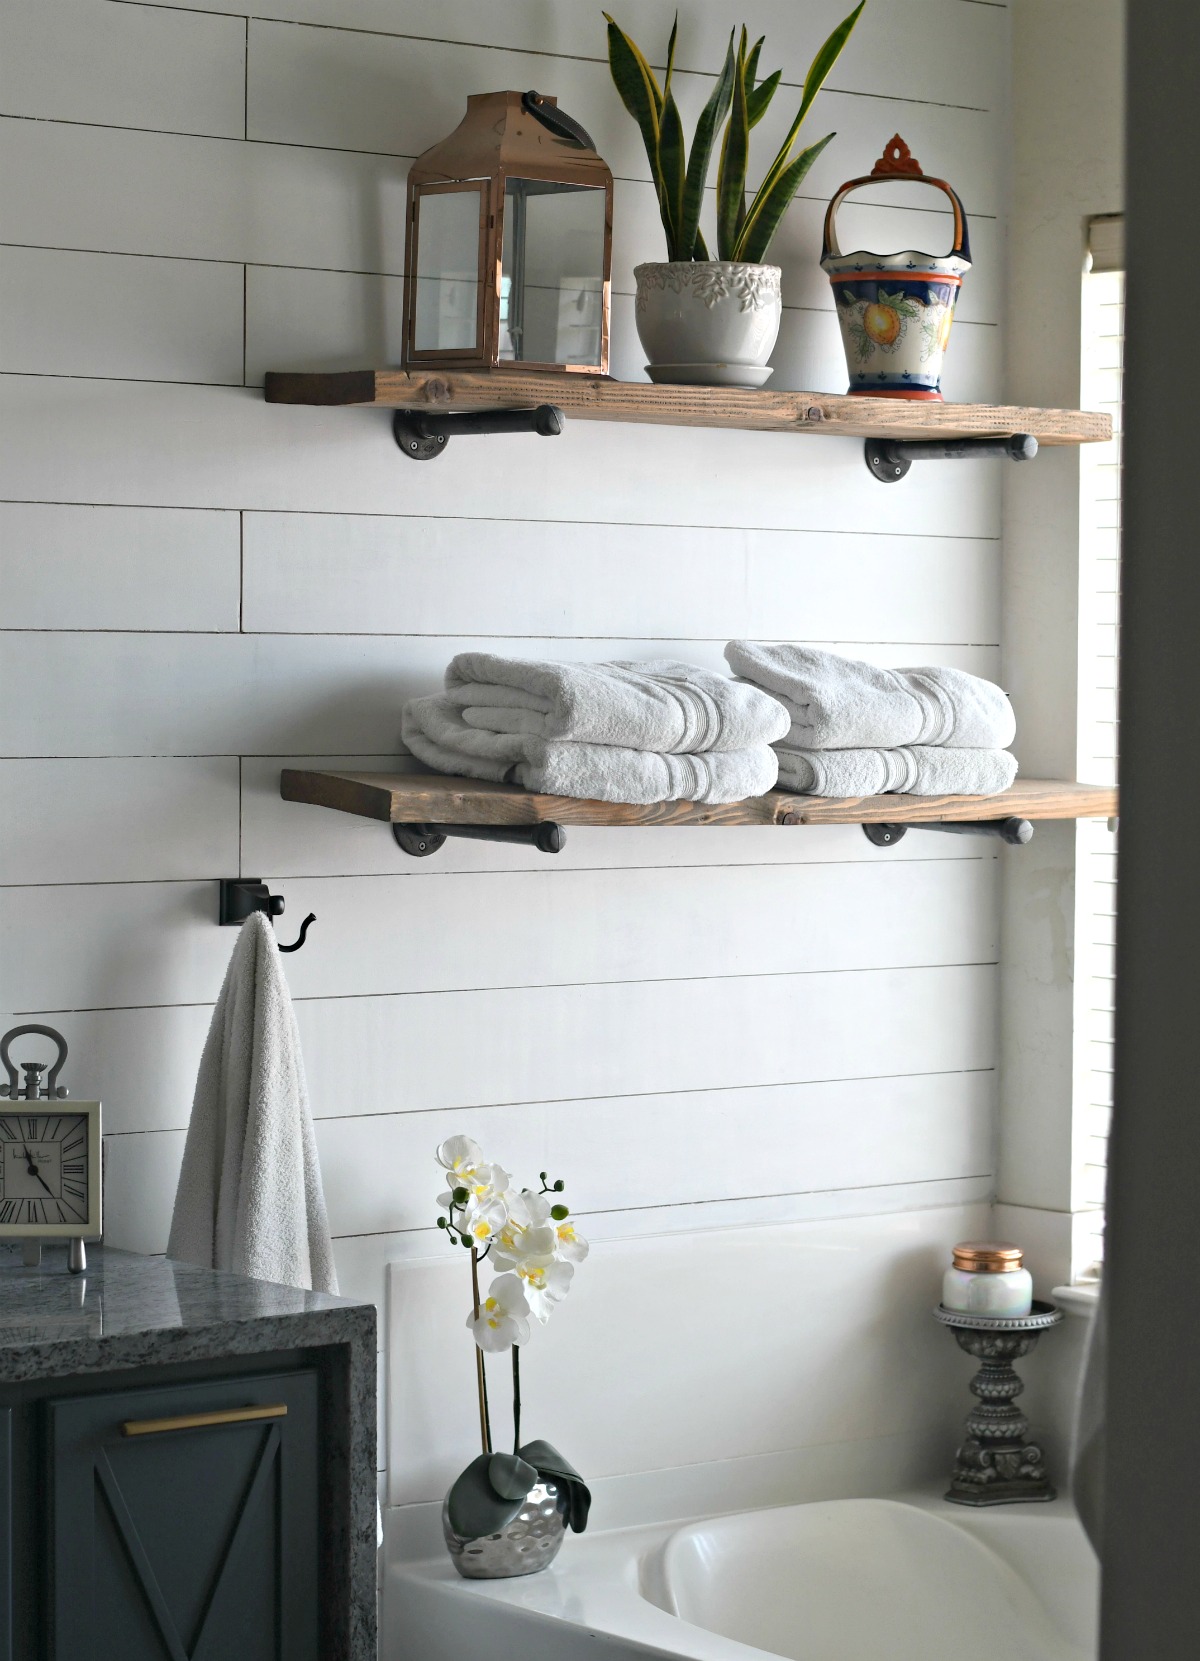 wood and pipe shelving above bath tub for towel storage